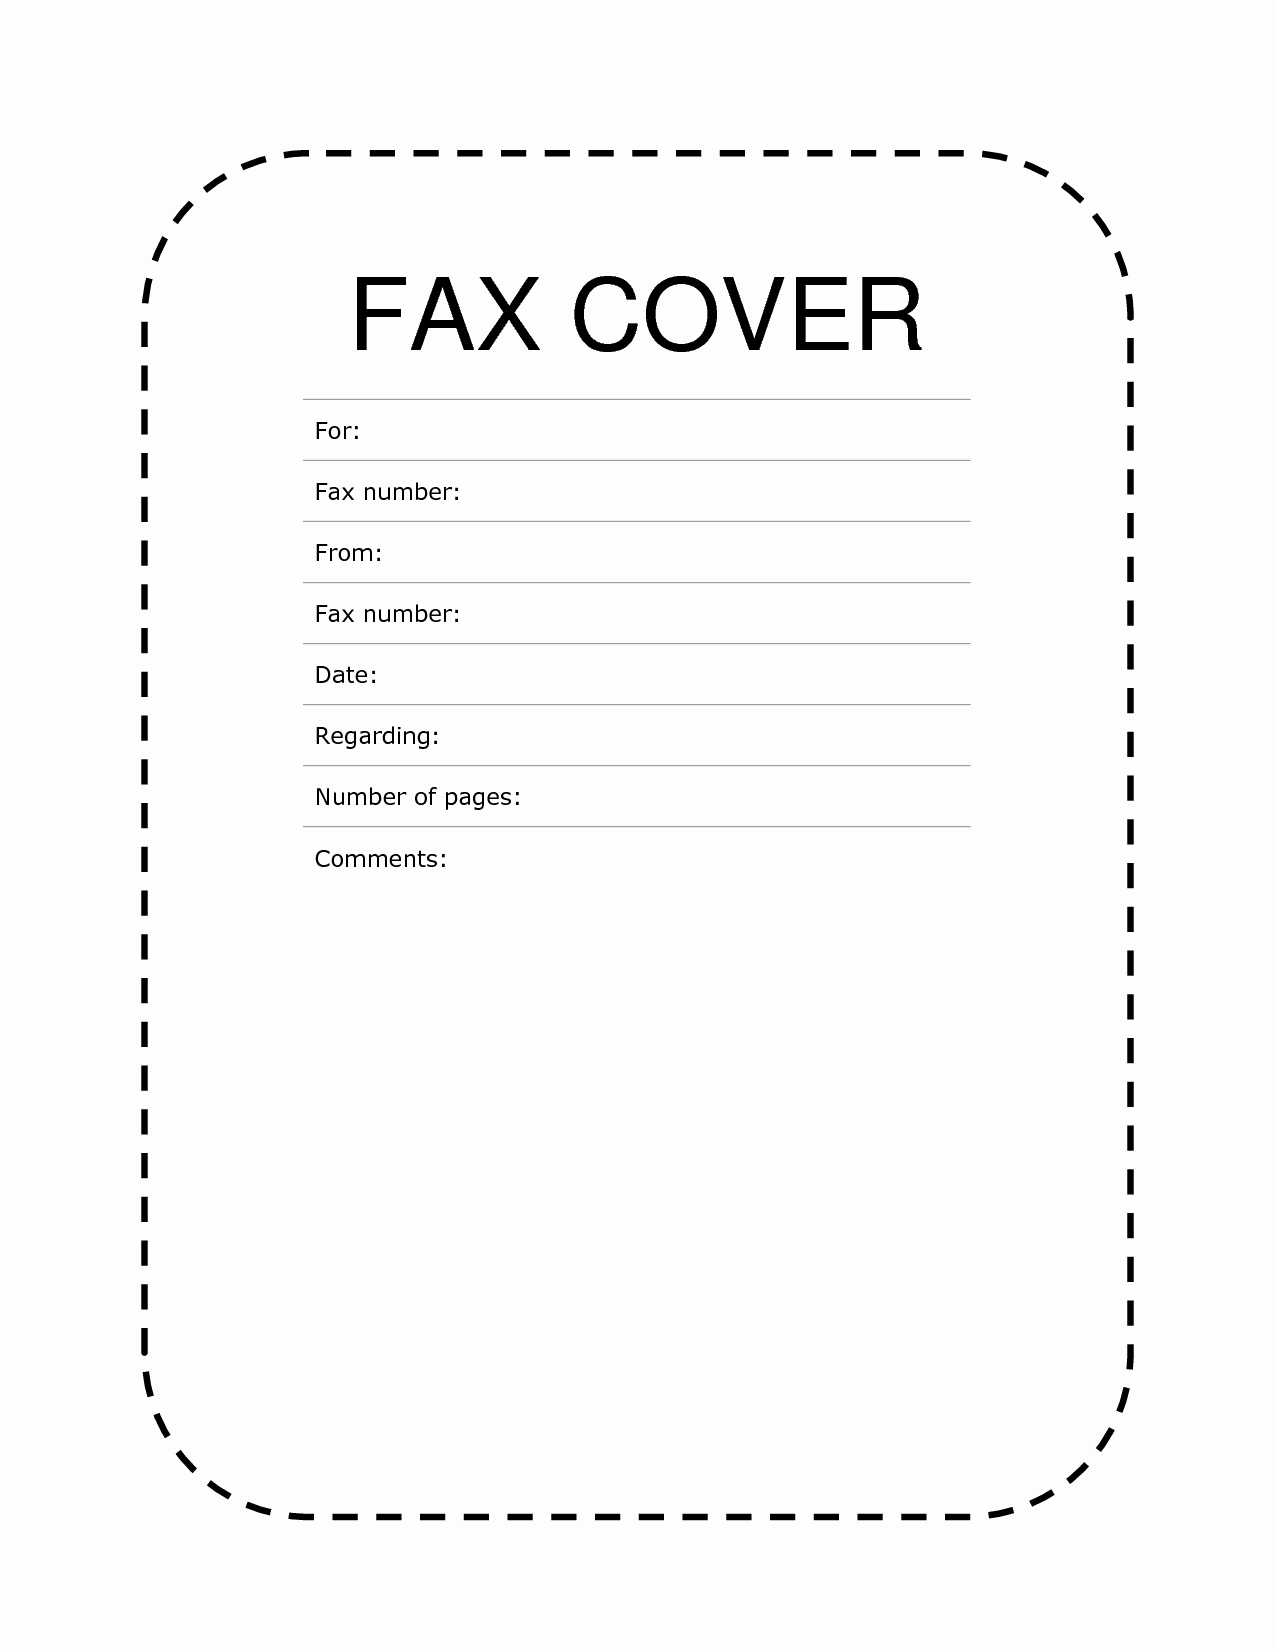 Word Template Fax Cover Sheet Luxury [free] Fax Cover Sheet Template